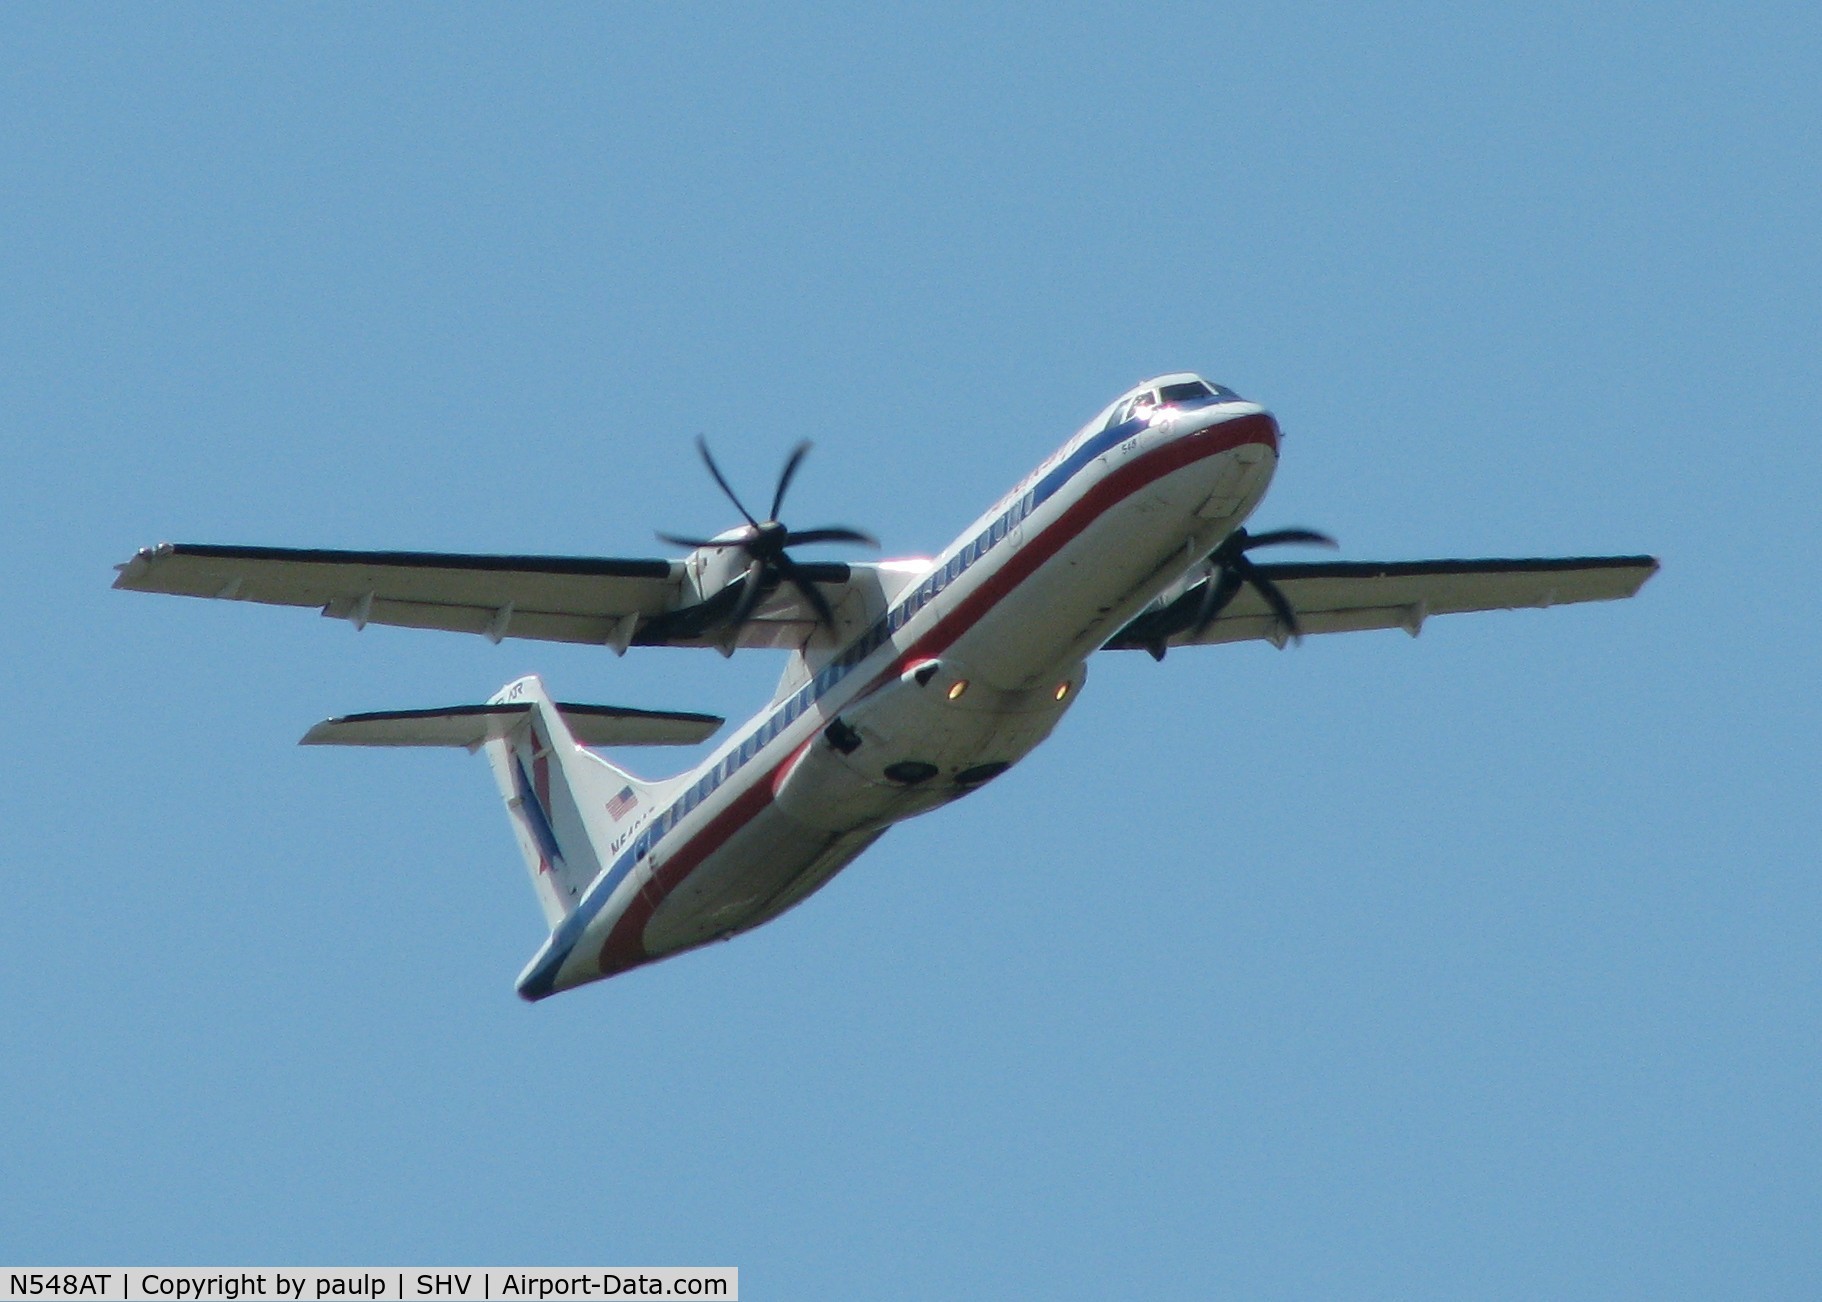 N548AT, 1998 ATR 72-212A C/N 548, Off of 32 at the Shreveport Regional airport.